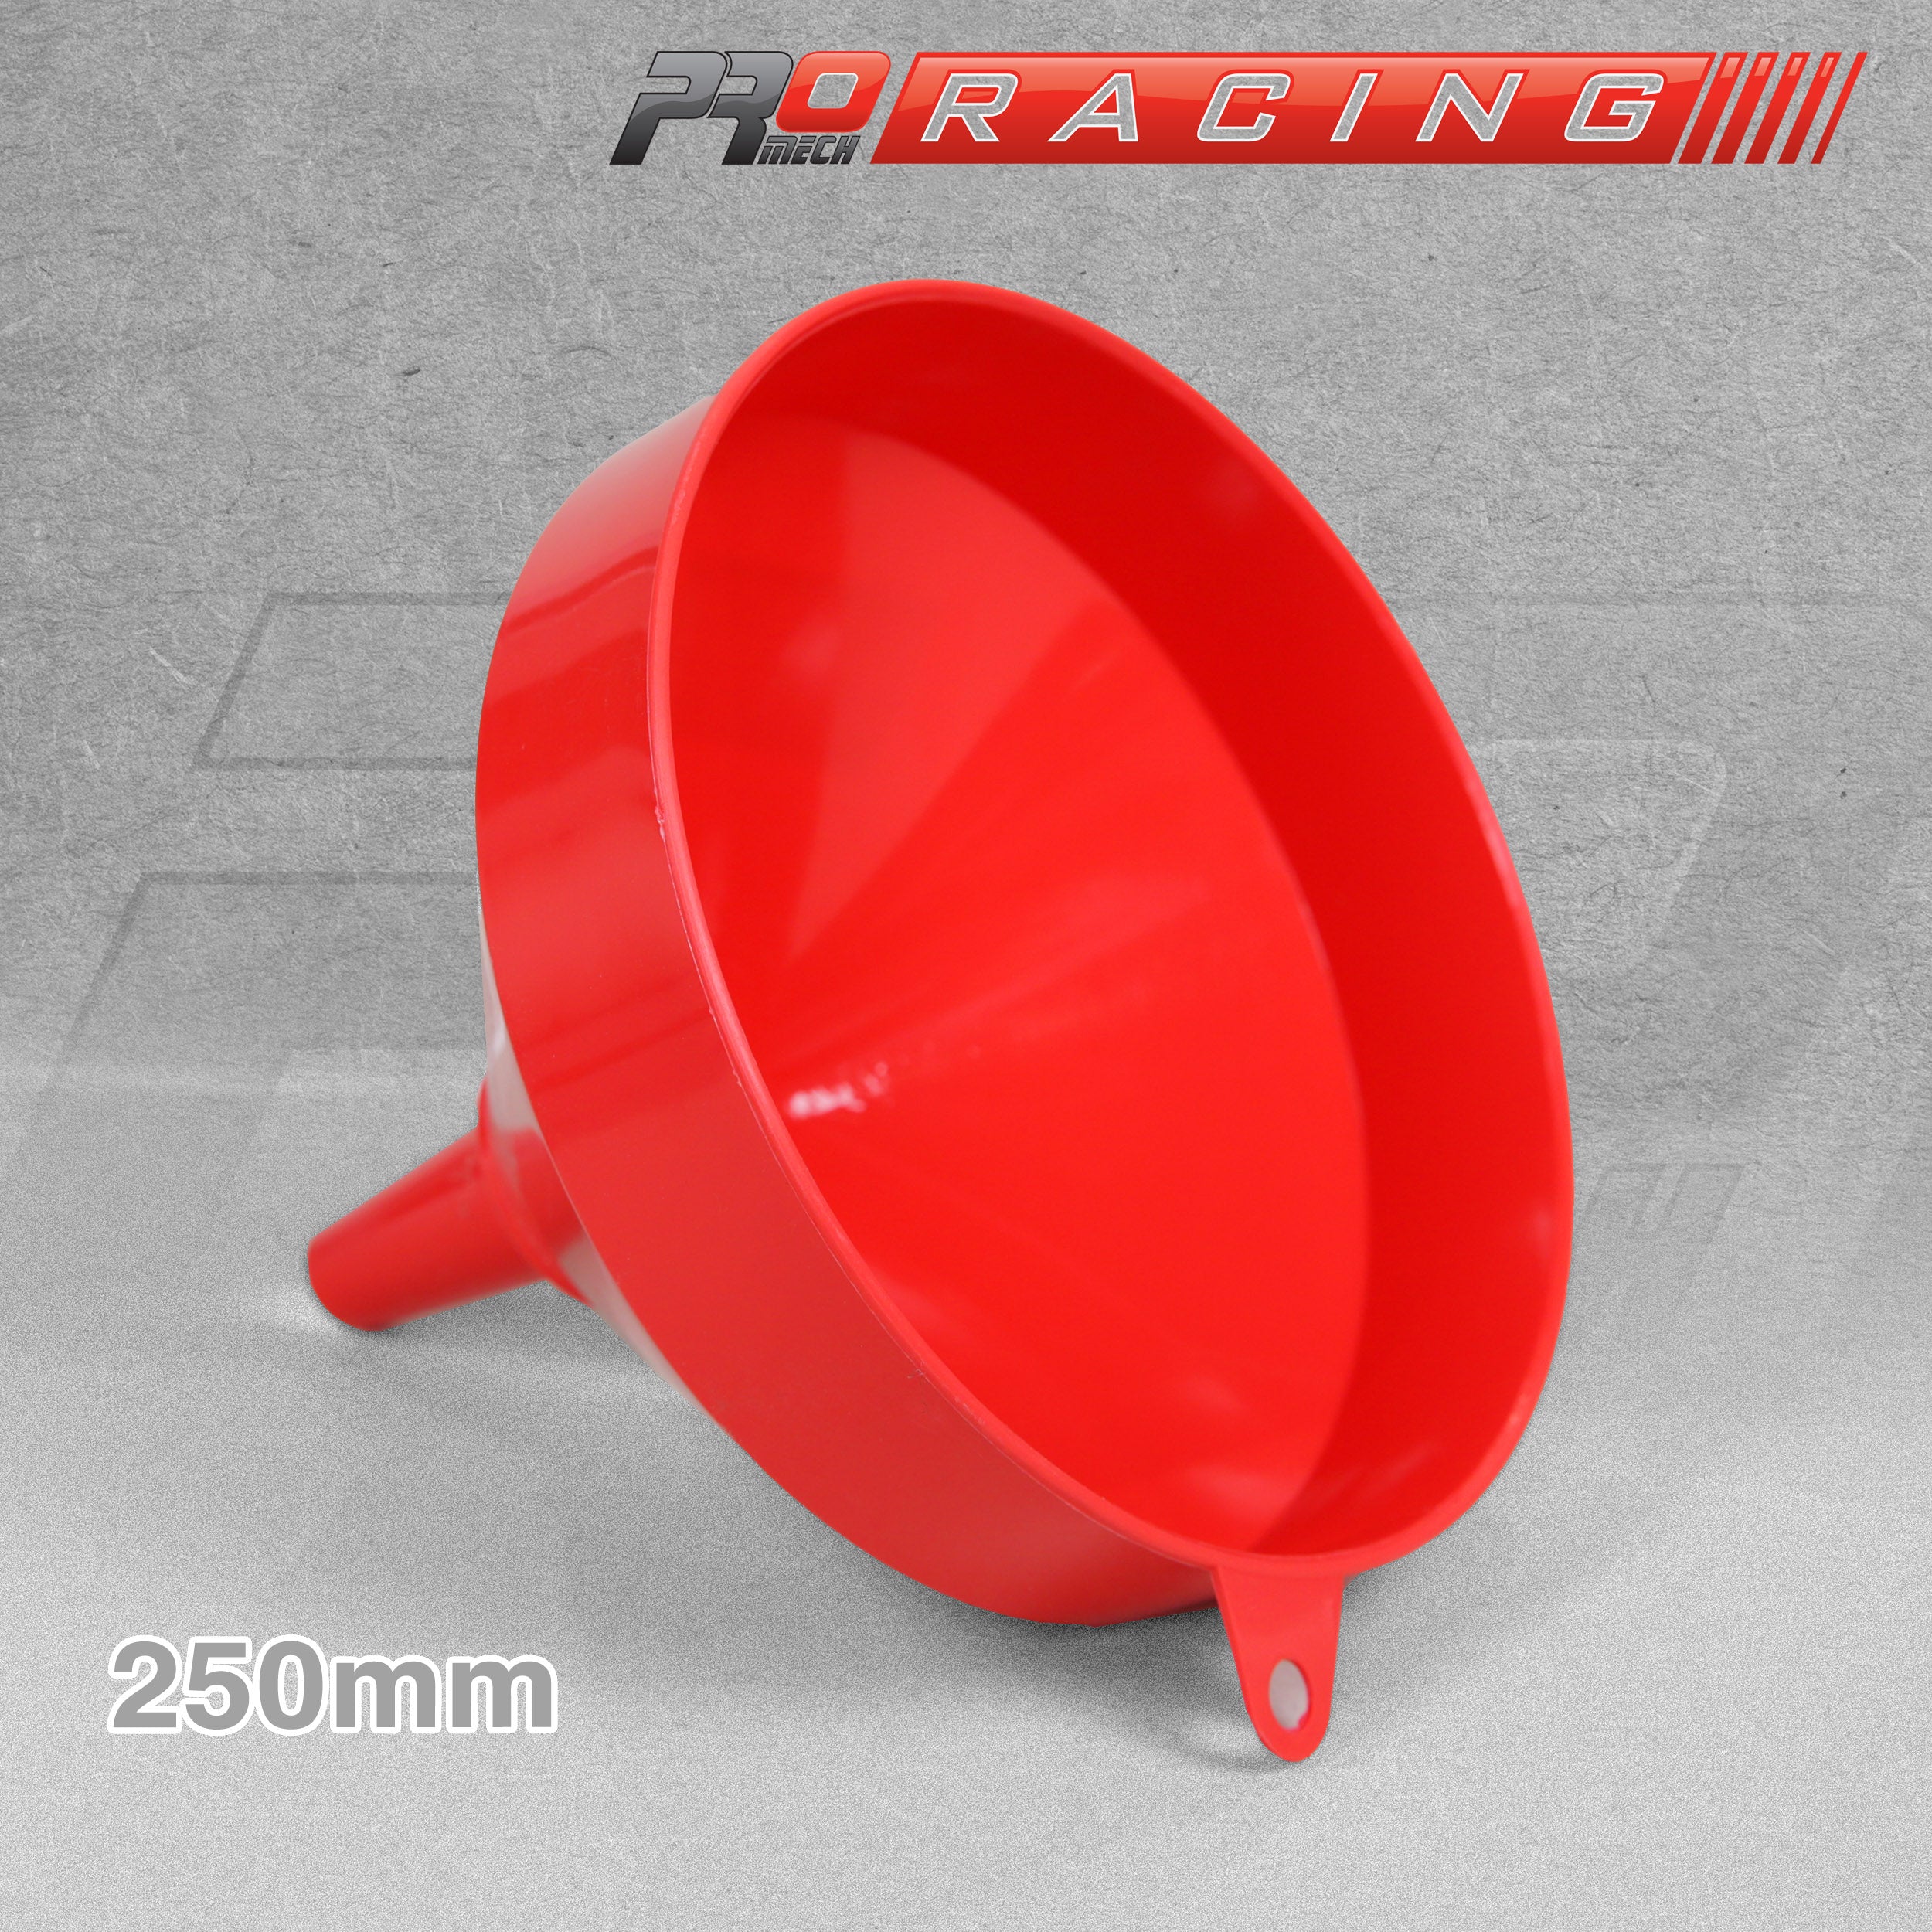 Pro Mech Large 250mm fixed spout Quick Fill Funnel - red